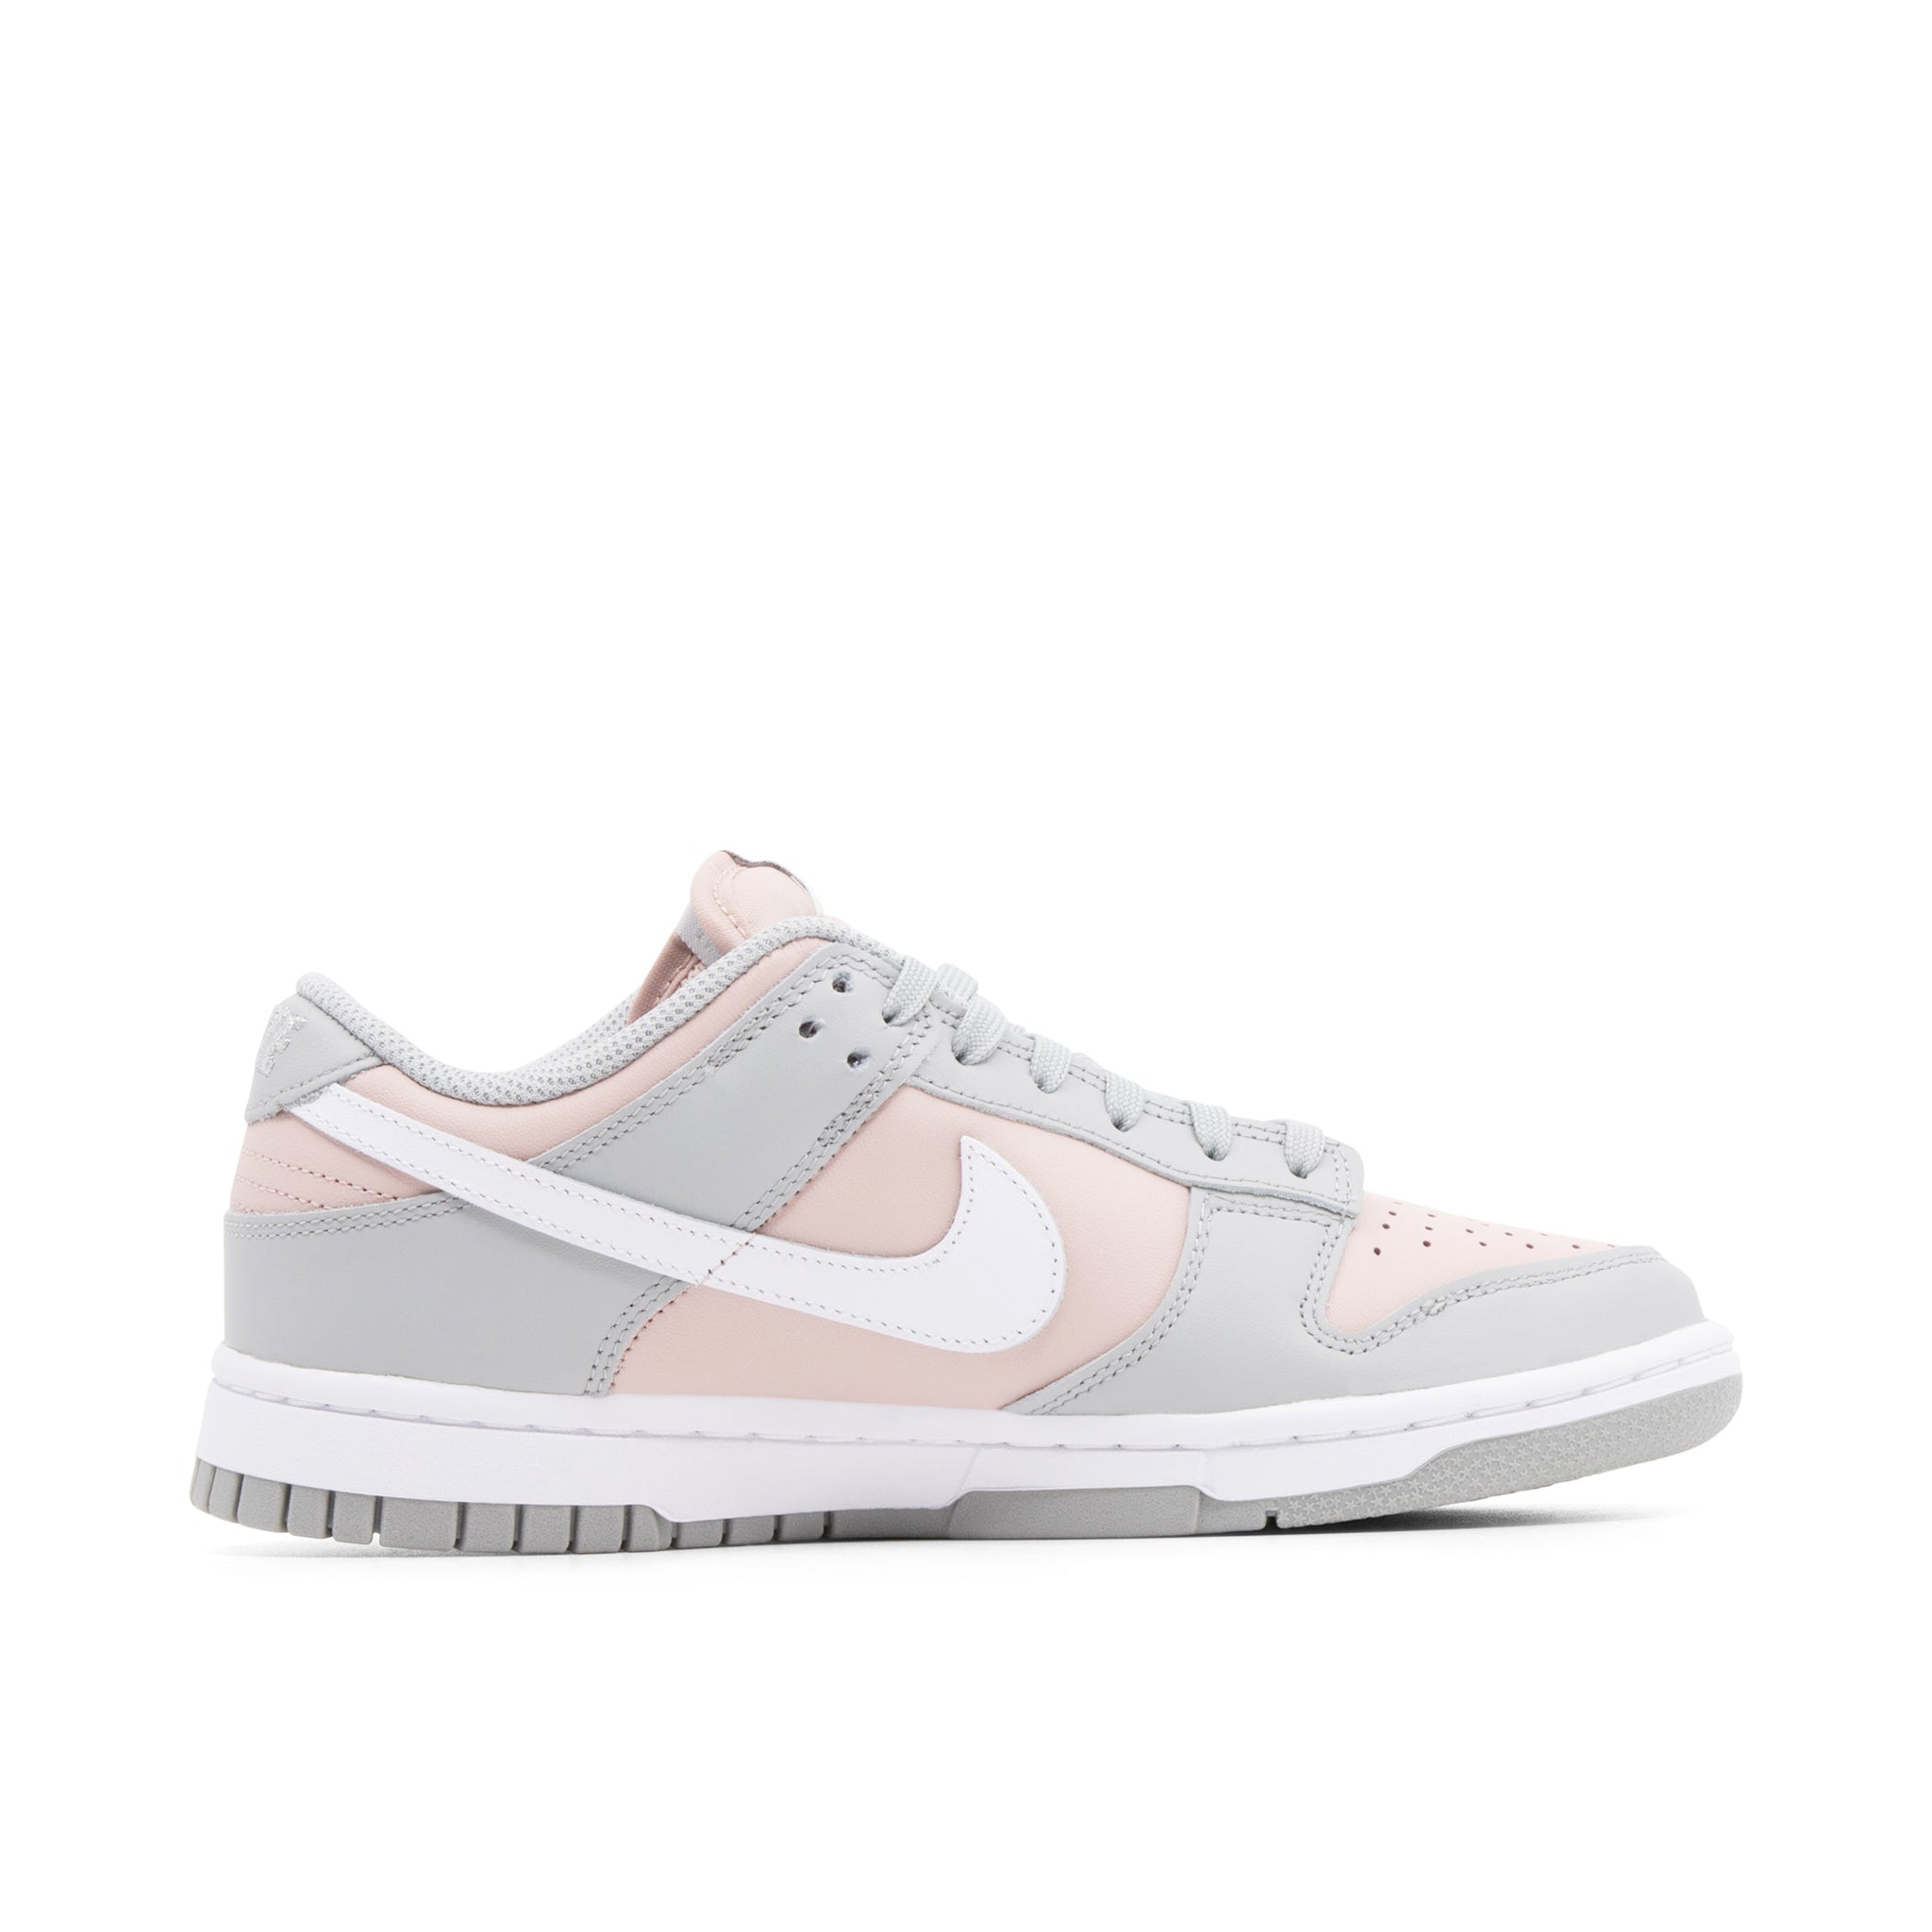 NIKE DUNK LOW WMNS SOFT GREY PINK